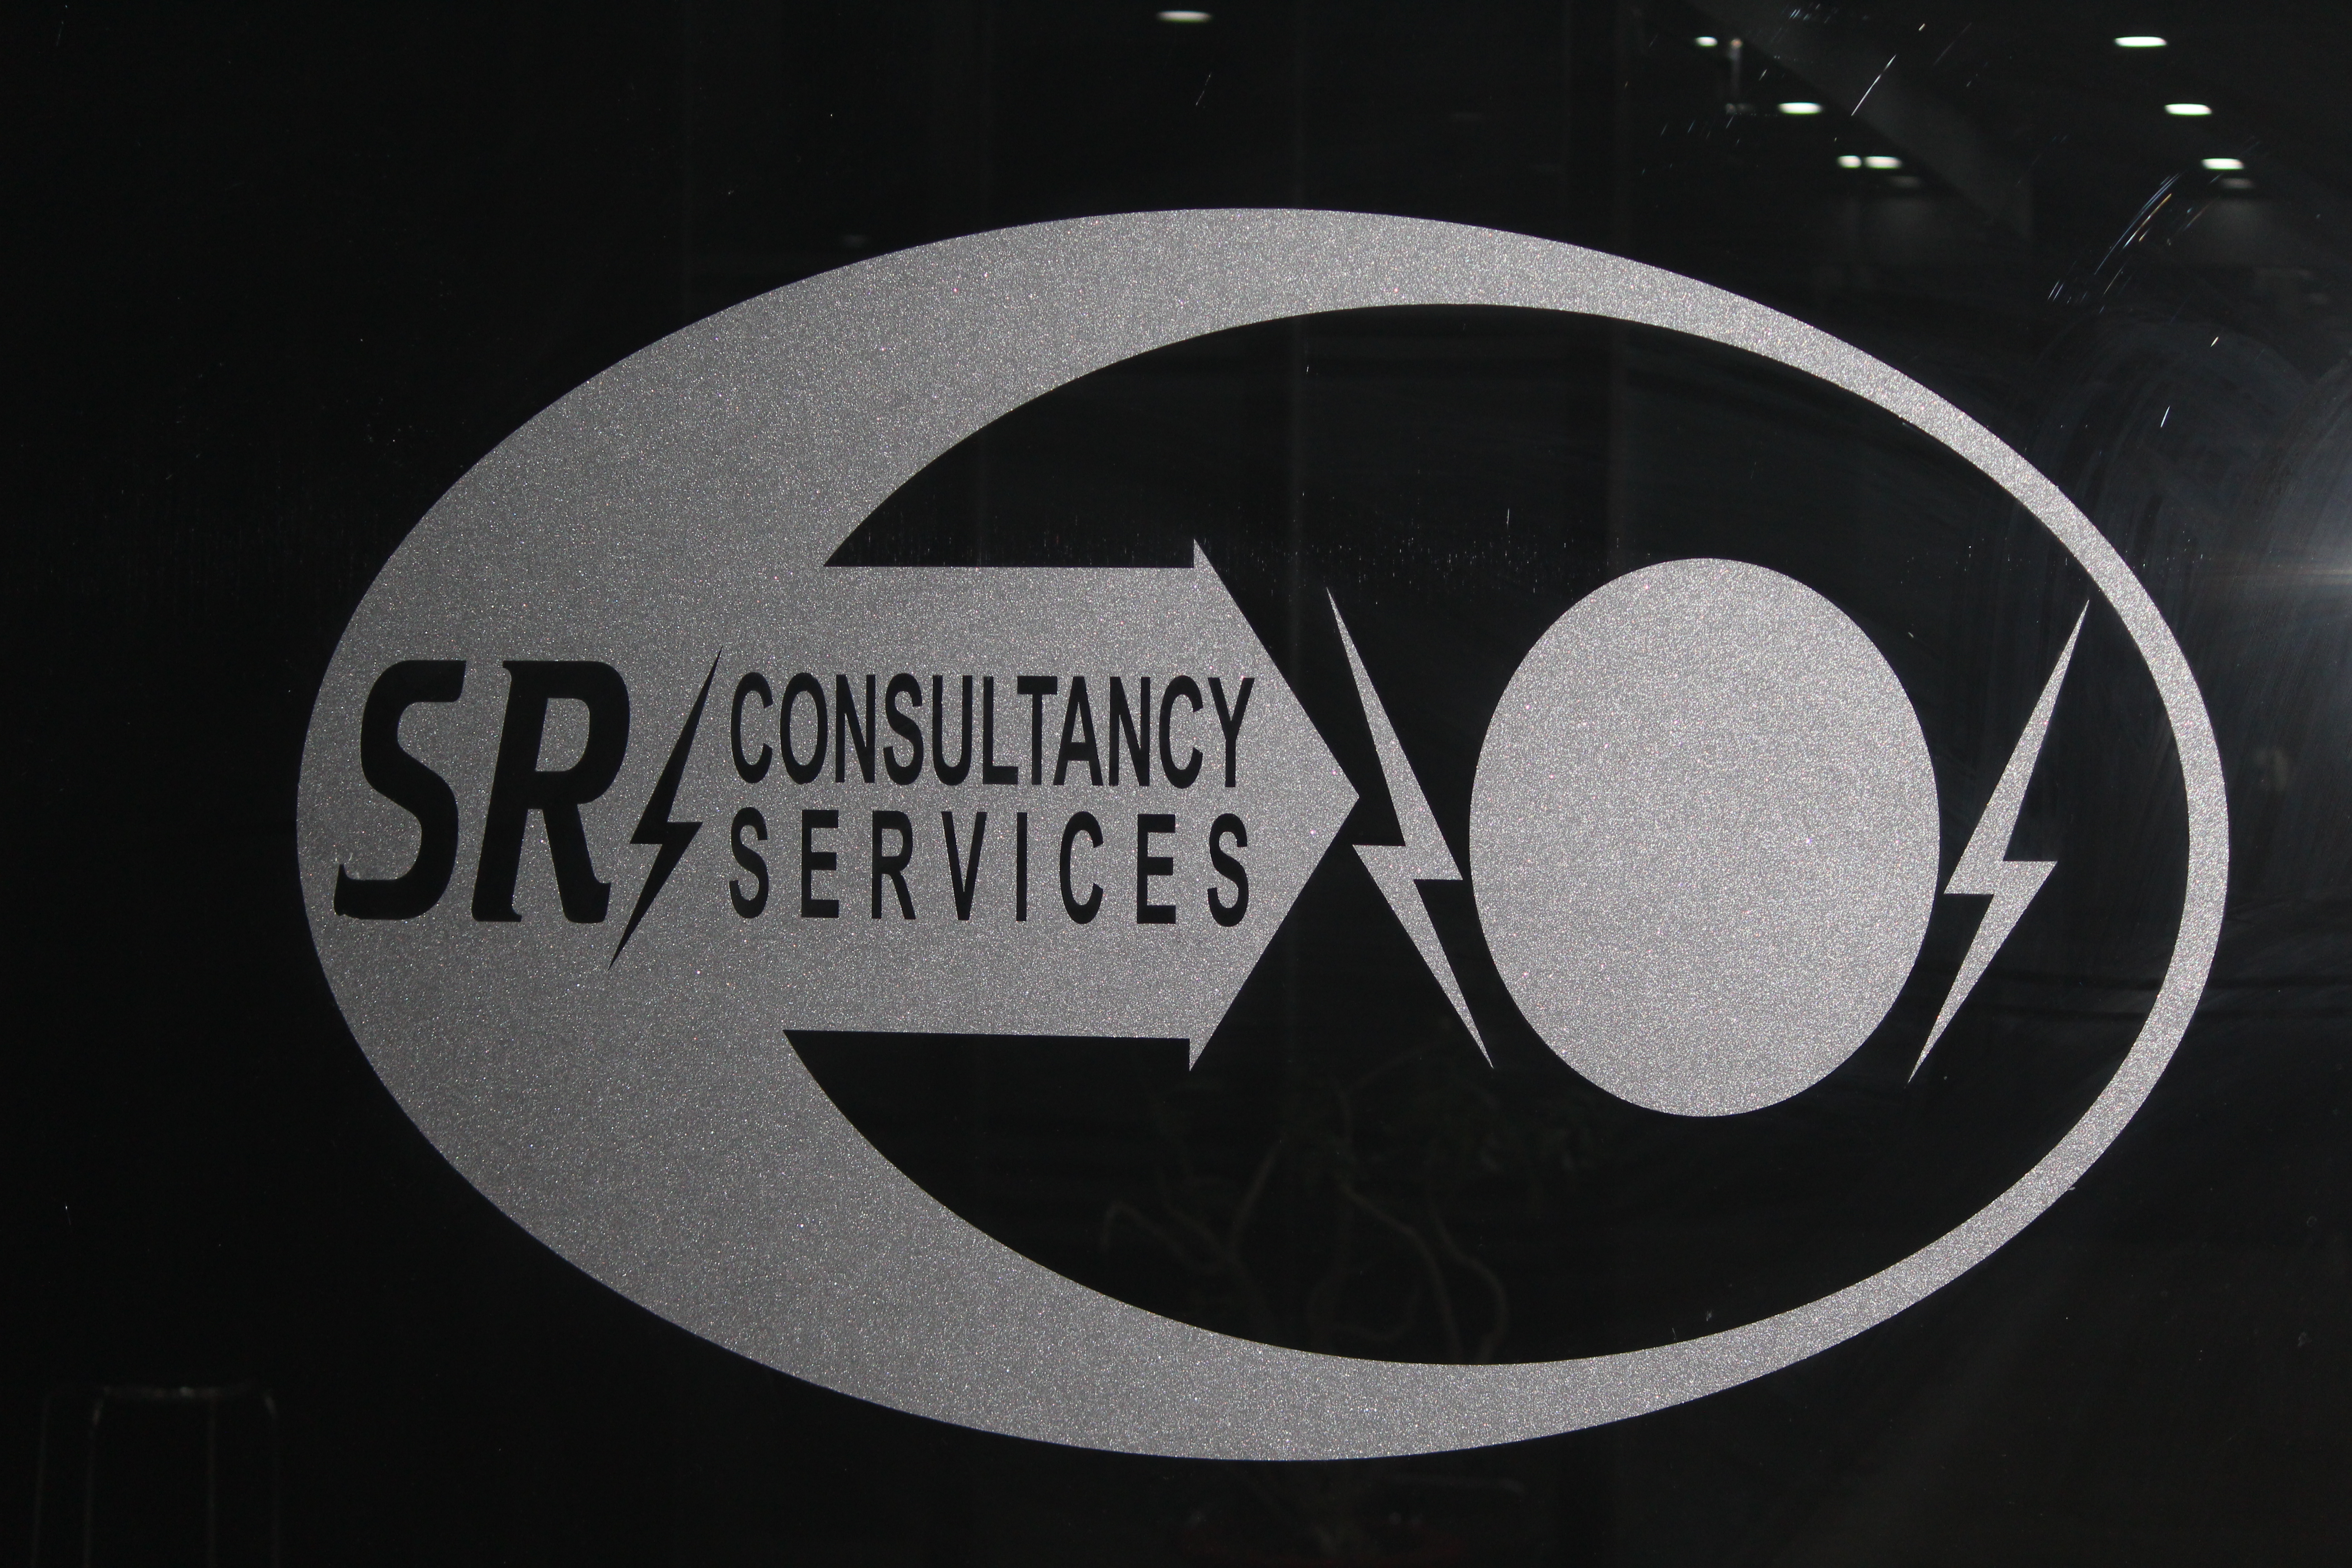 S.R. Corporate Consultant Private Limited